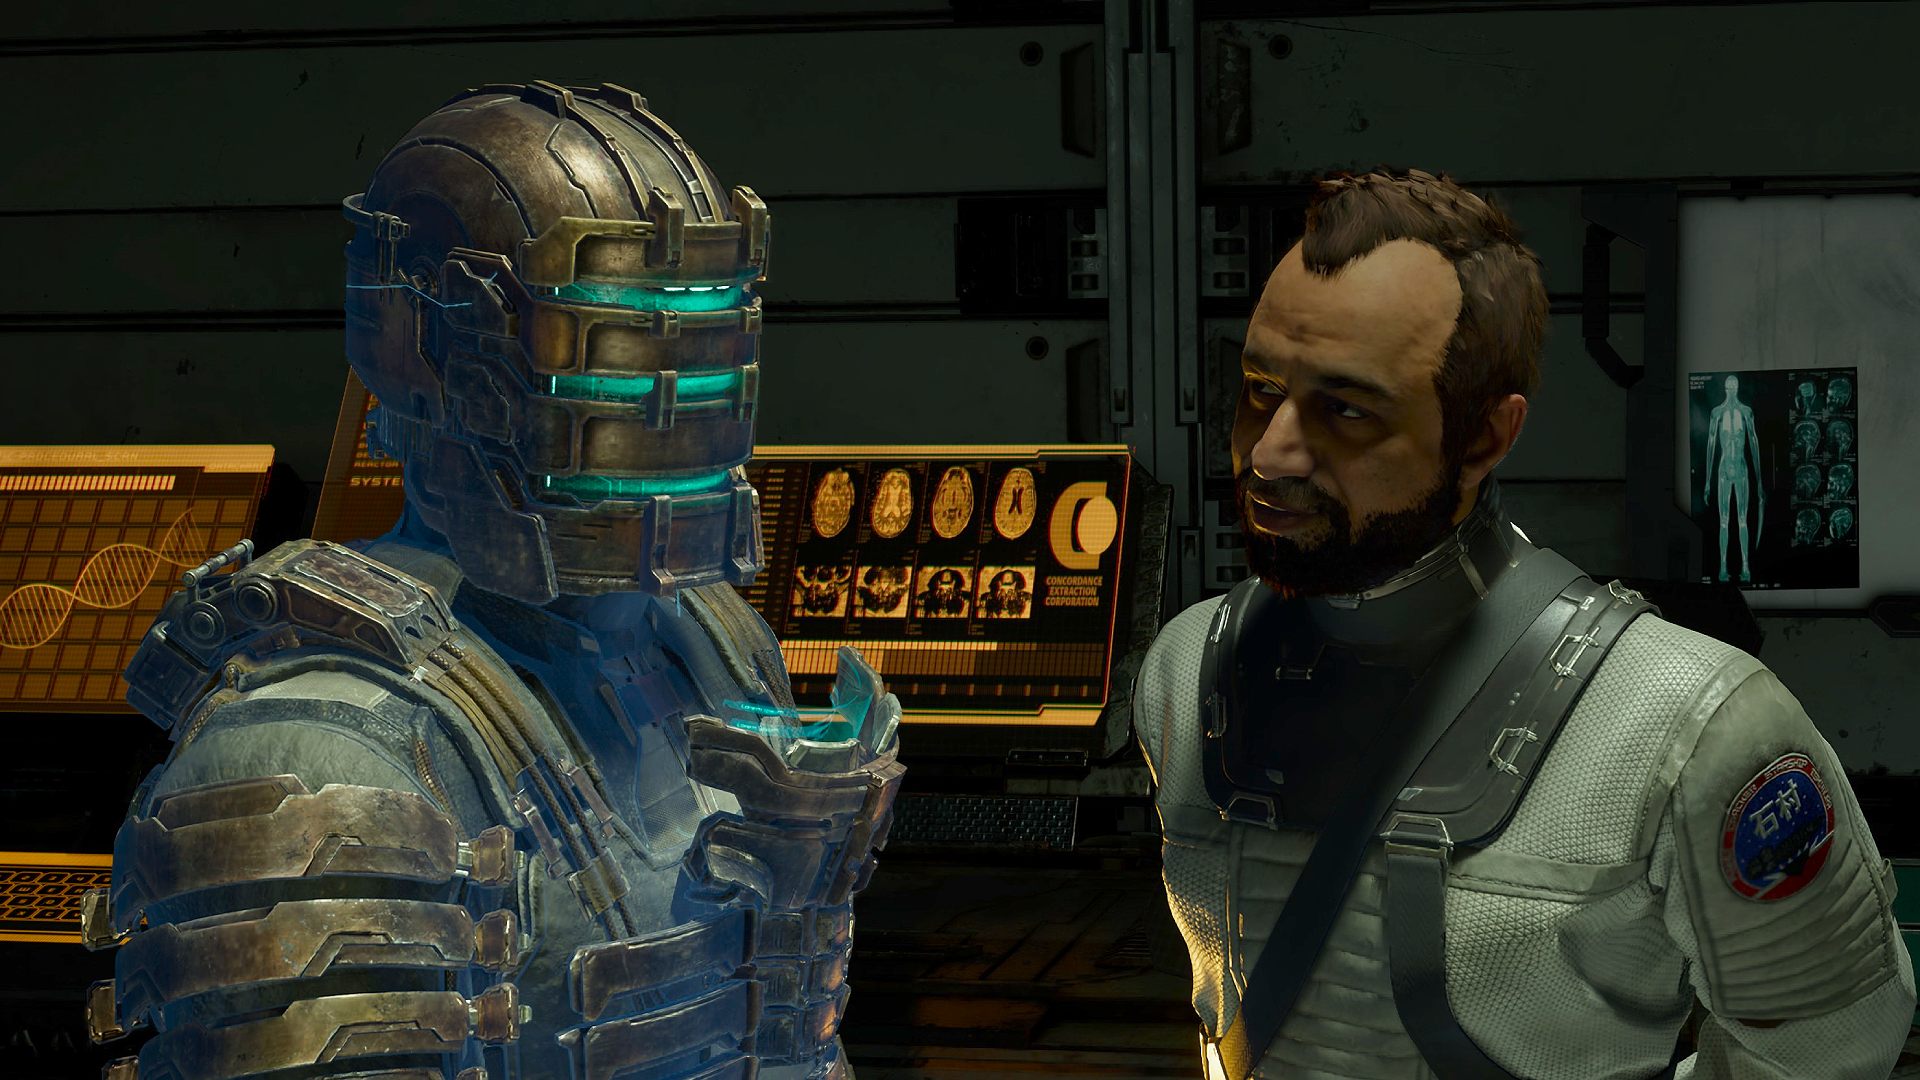 Best Dead Space setting: Isaac Clarke standing next to Dr. Mercer